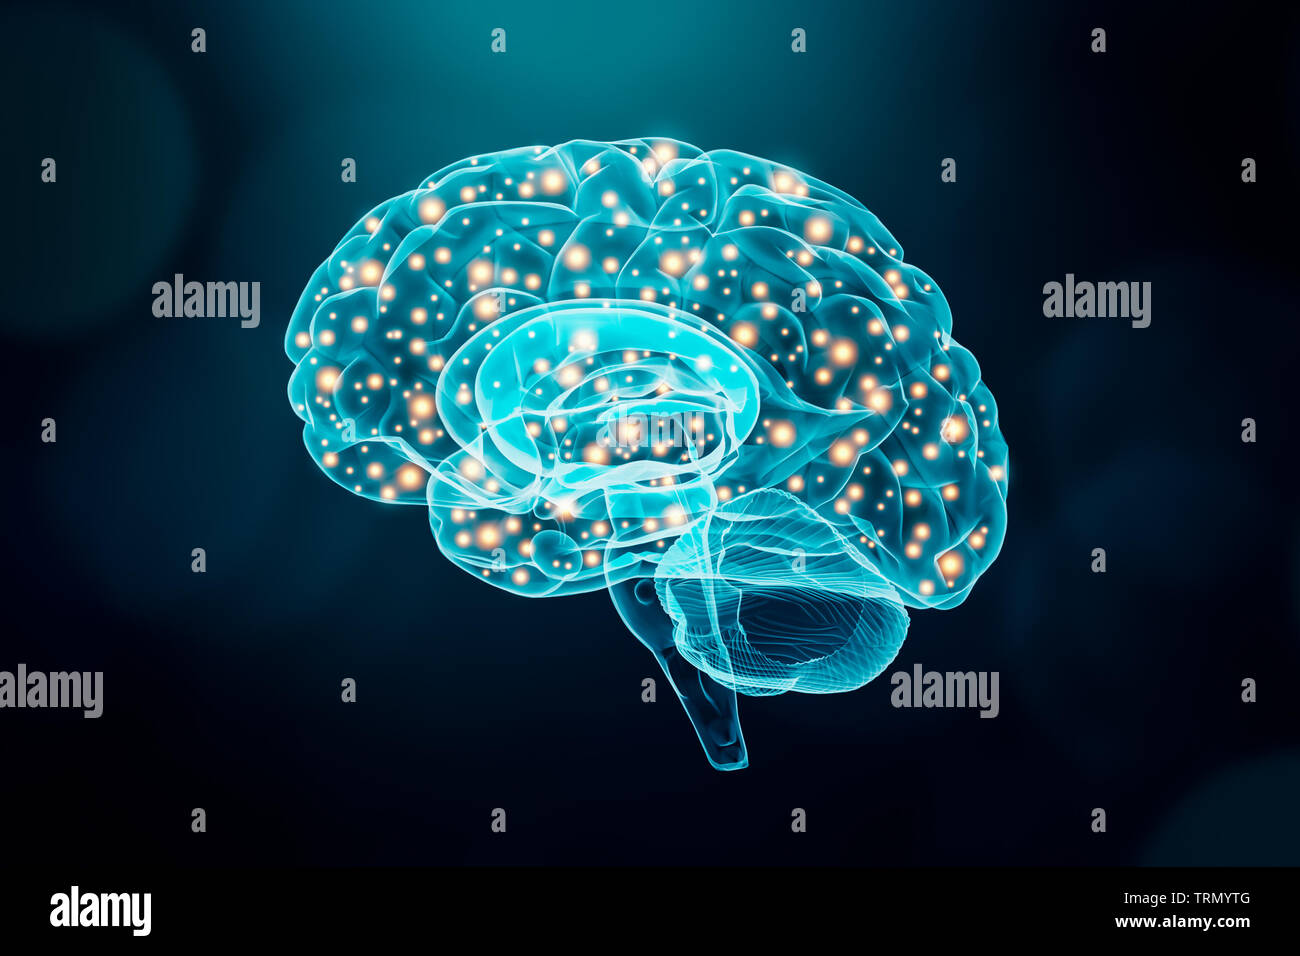 Human brain. Cerebral or neuronal activity concept. Science, cognition, psychology, memory, learning conceptual illustration. Stock Photo